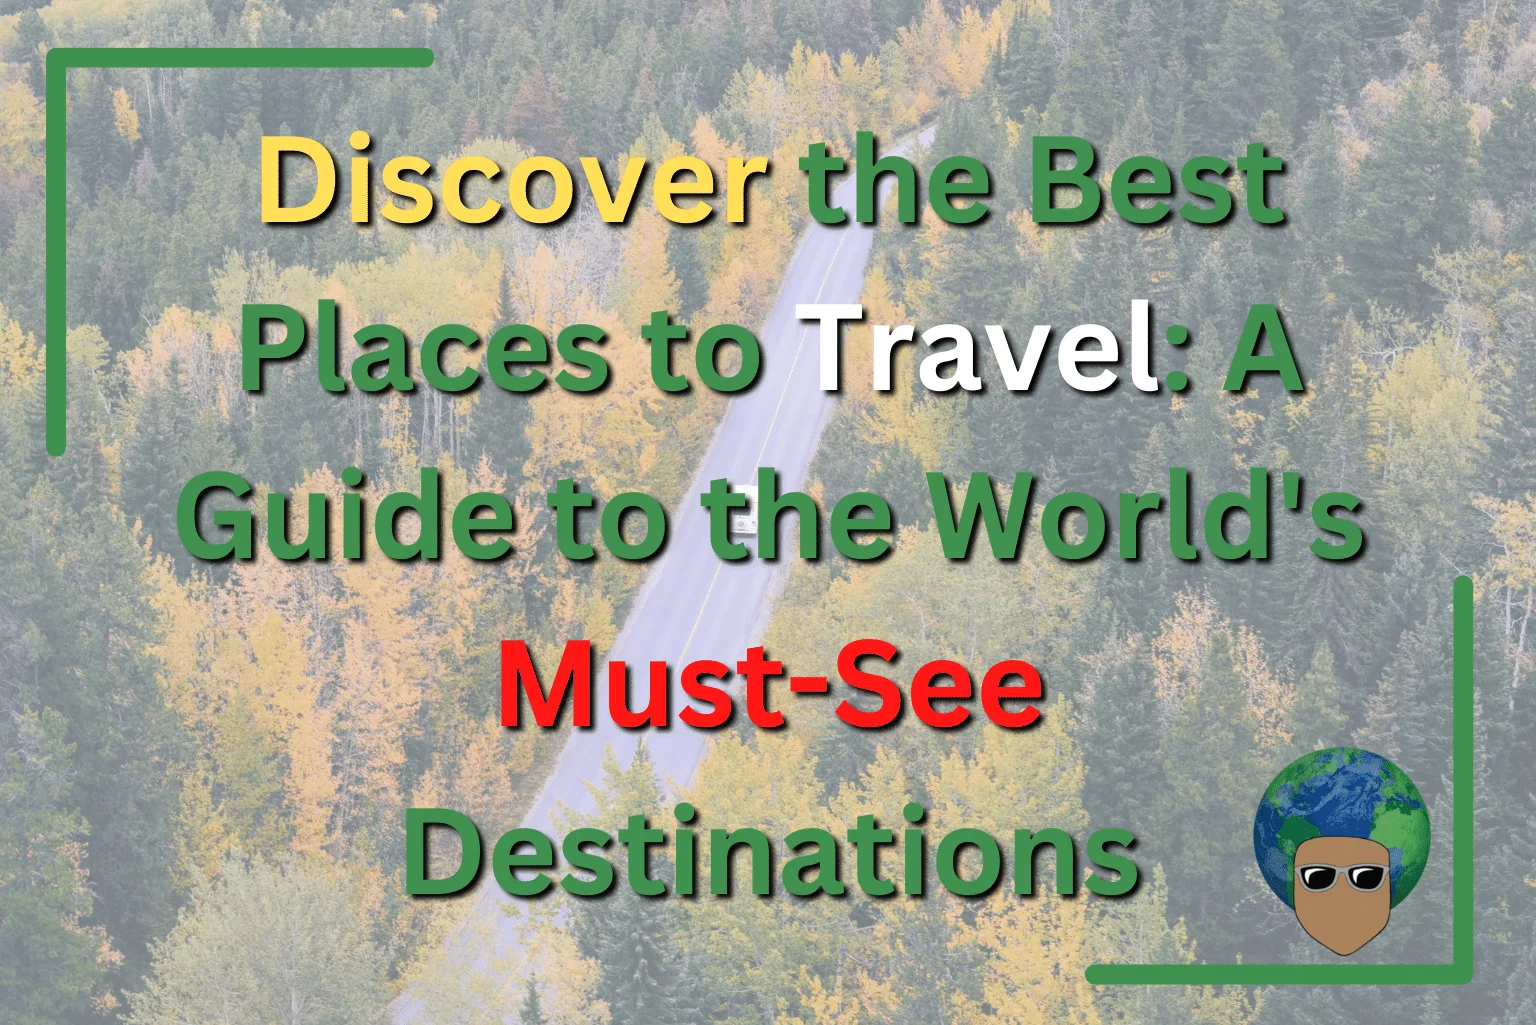 You are currently viewing A Guide to the World’s Must-See Destinations